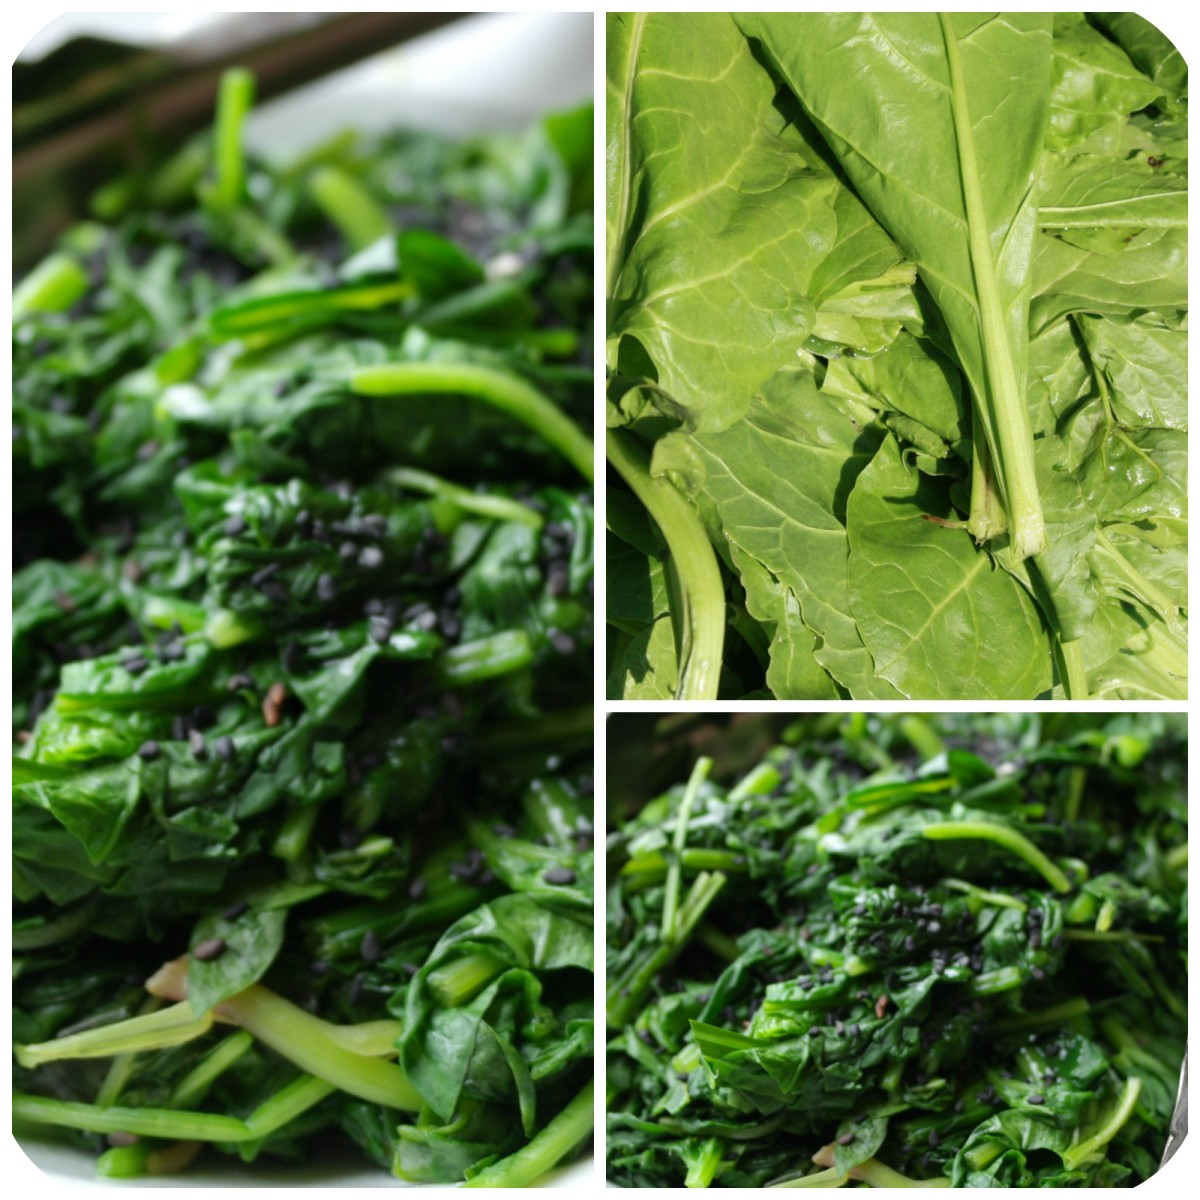 Cooked spinach has been shown to contain more nutritional value that raw spinach! Steam your spinach and have it for lunch for healthy and radiant skin.